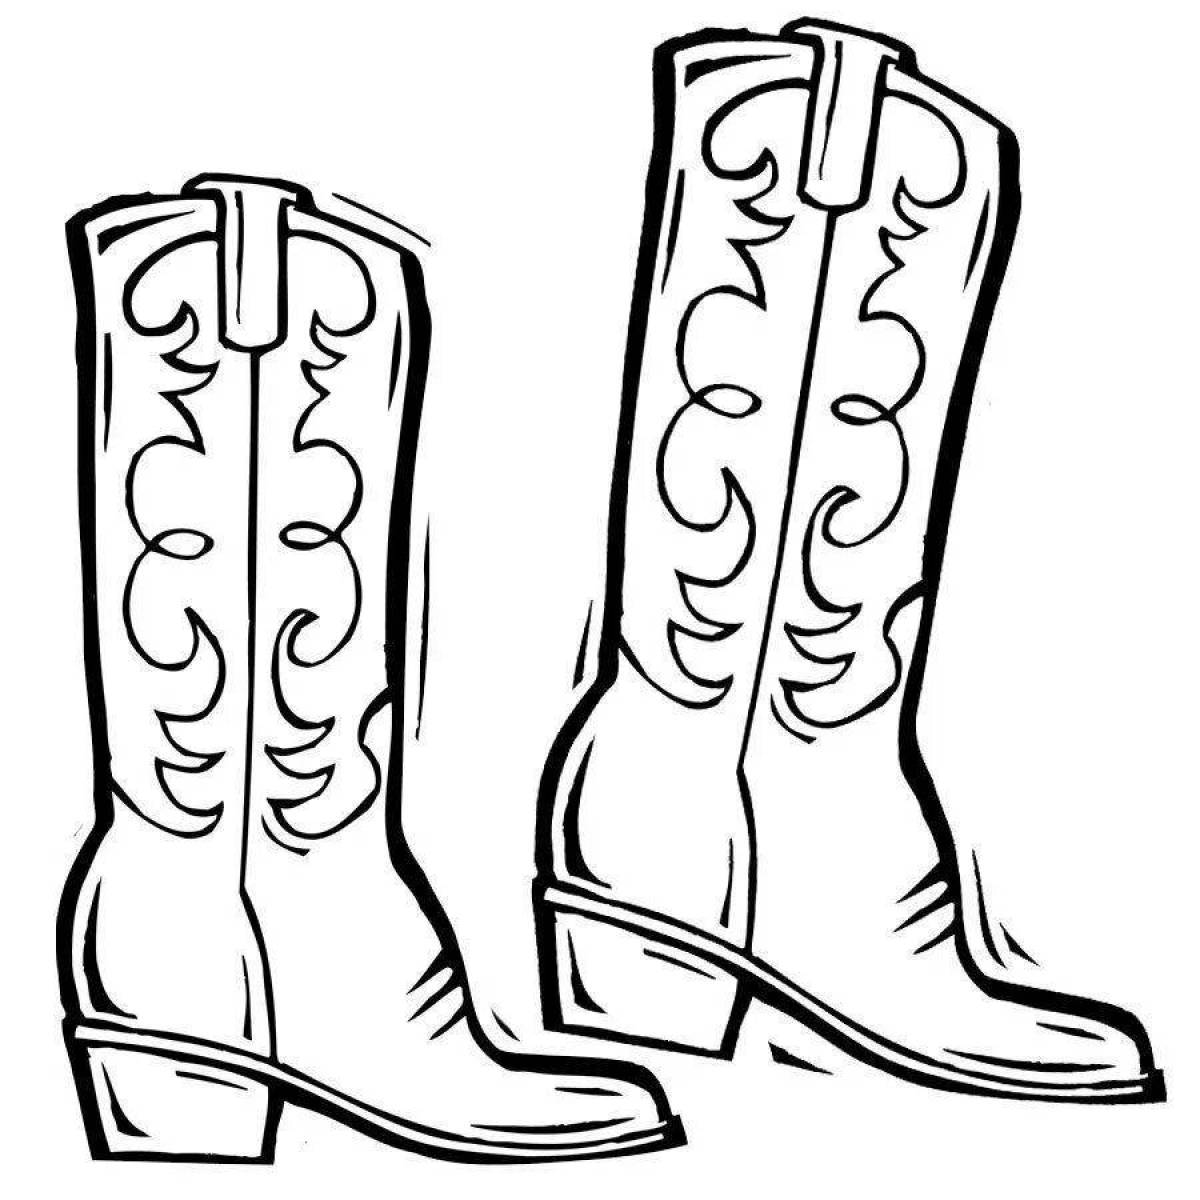 Incredible boots coloring for kids